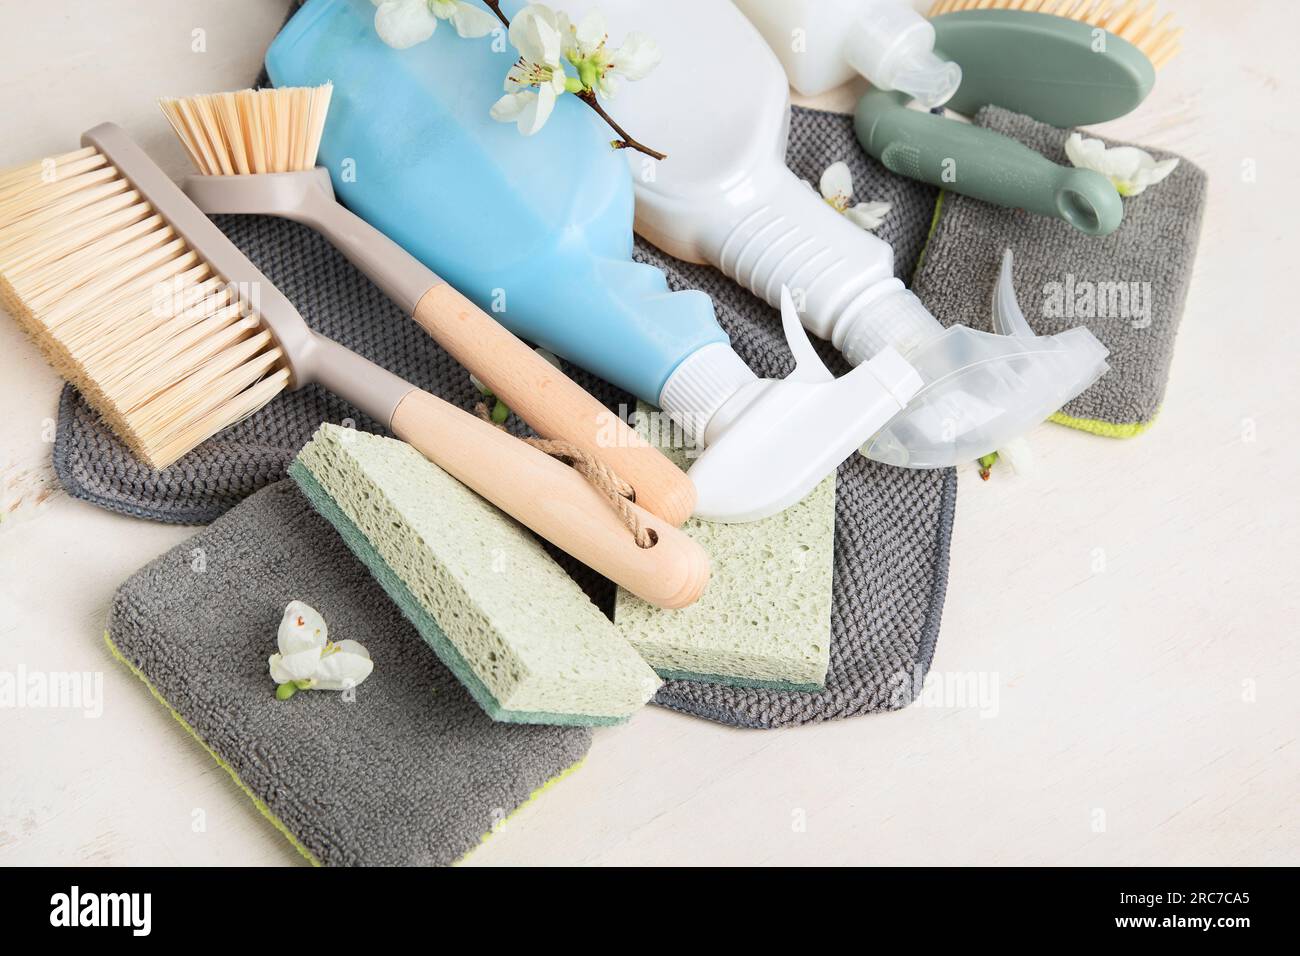 Brushes, sponges, rubber gloves and natural cleaning products. Eco-friendly cleaning products on a white background. Top view. Stock Photo